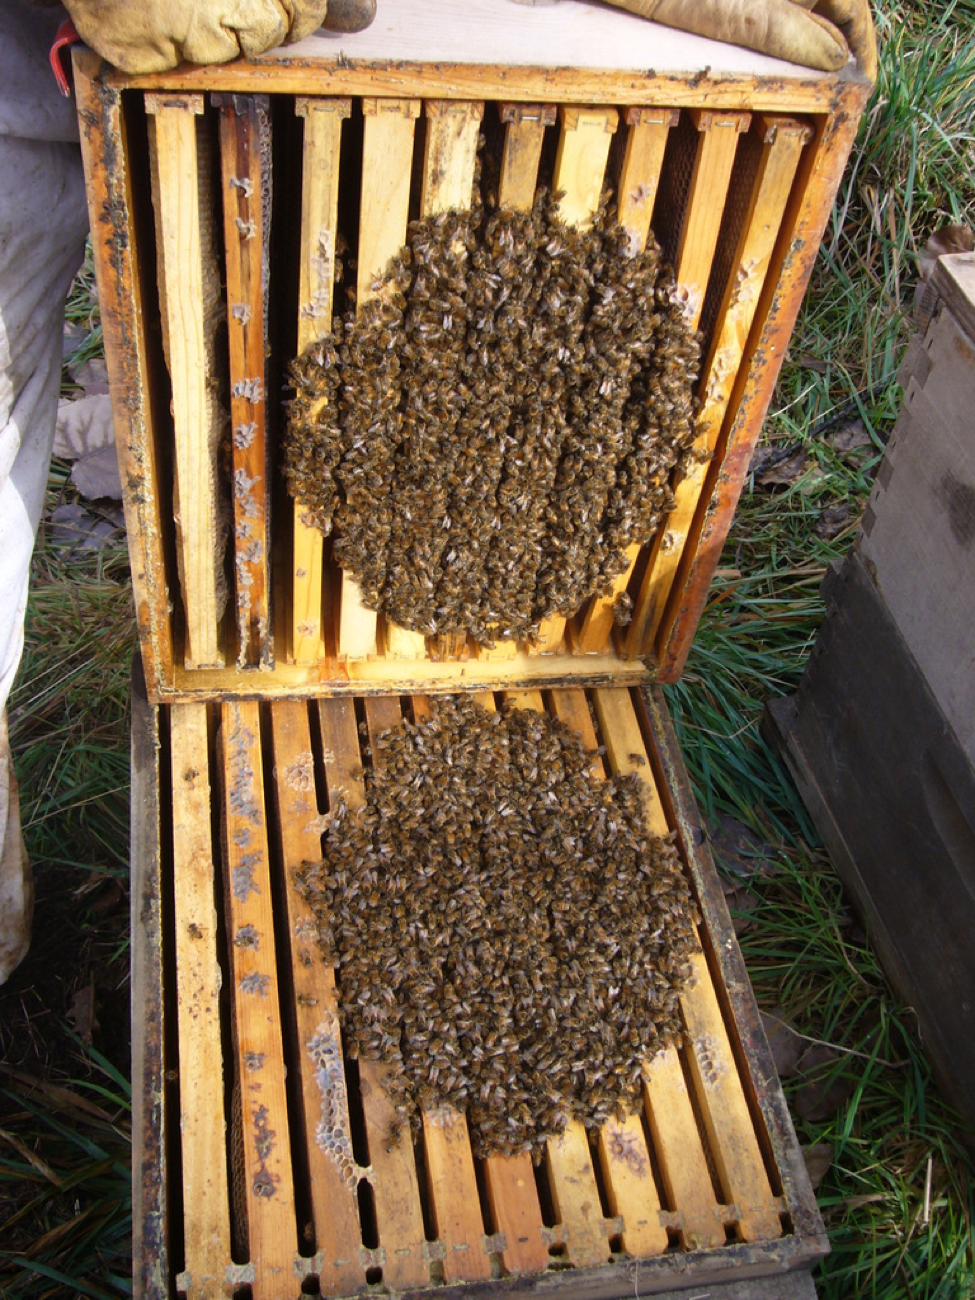 Why Do Honeycombs Look That Way?, Beekeeping Learning Center